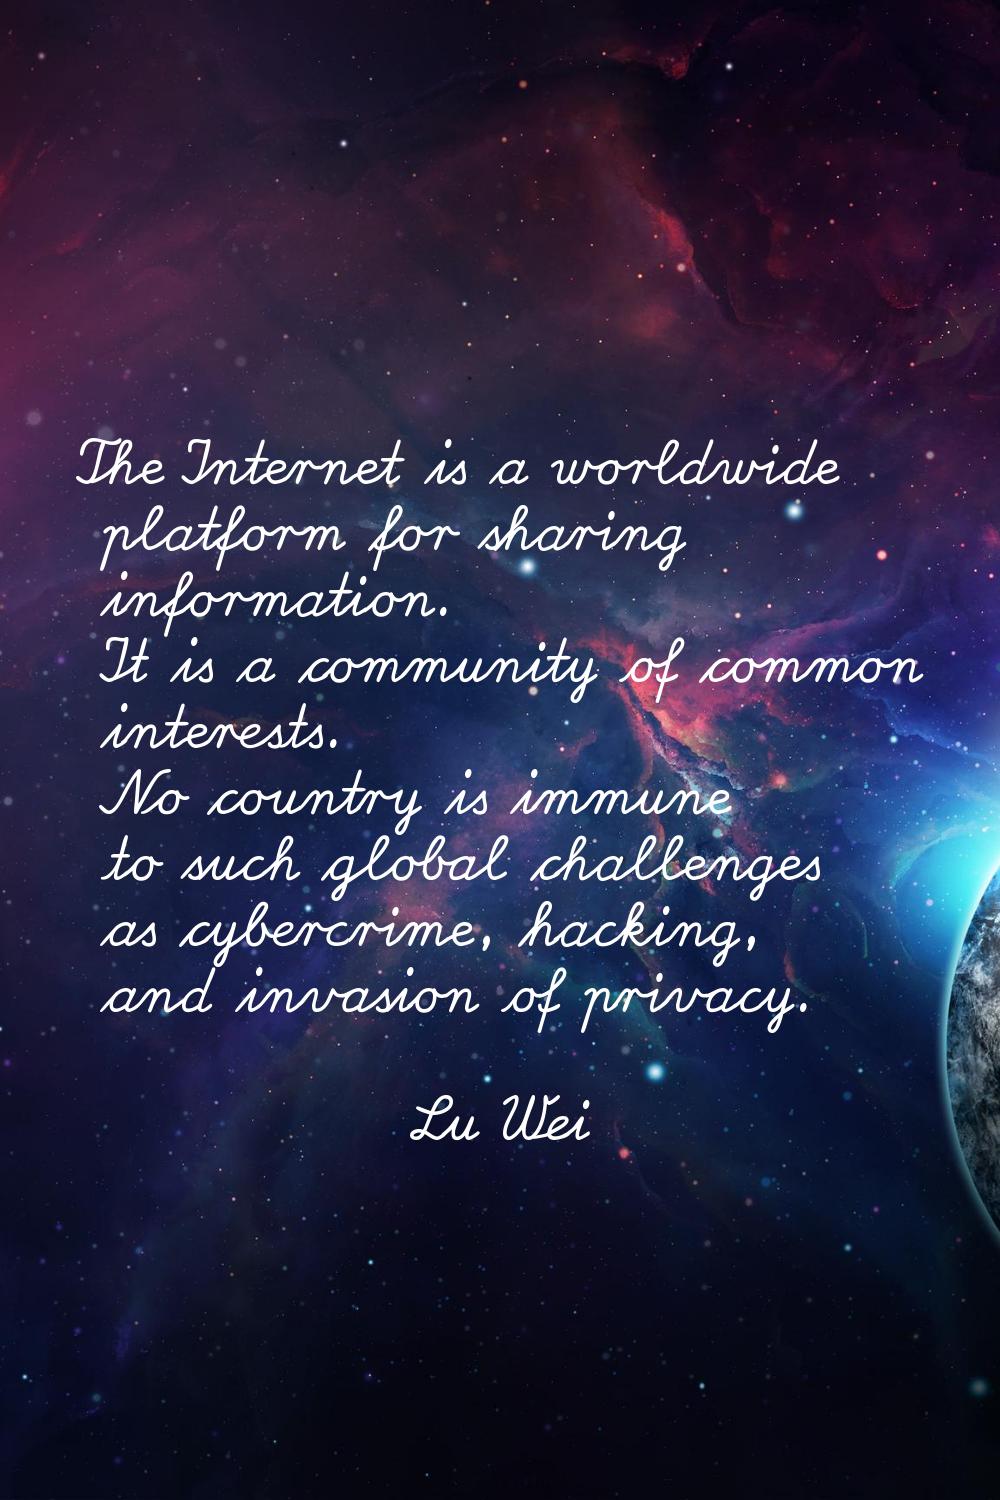 The Internet is a worldwide platform for sharing information. It is a community of common interests